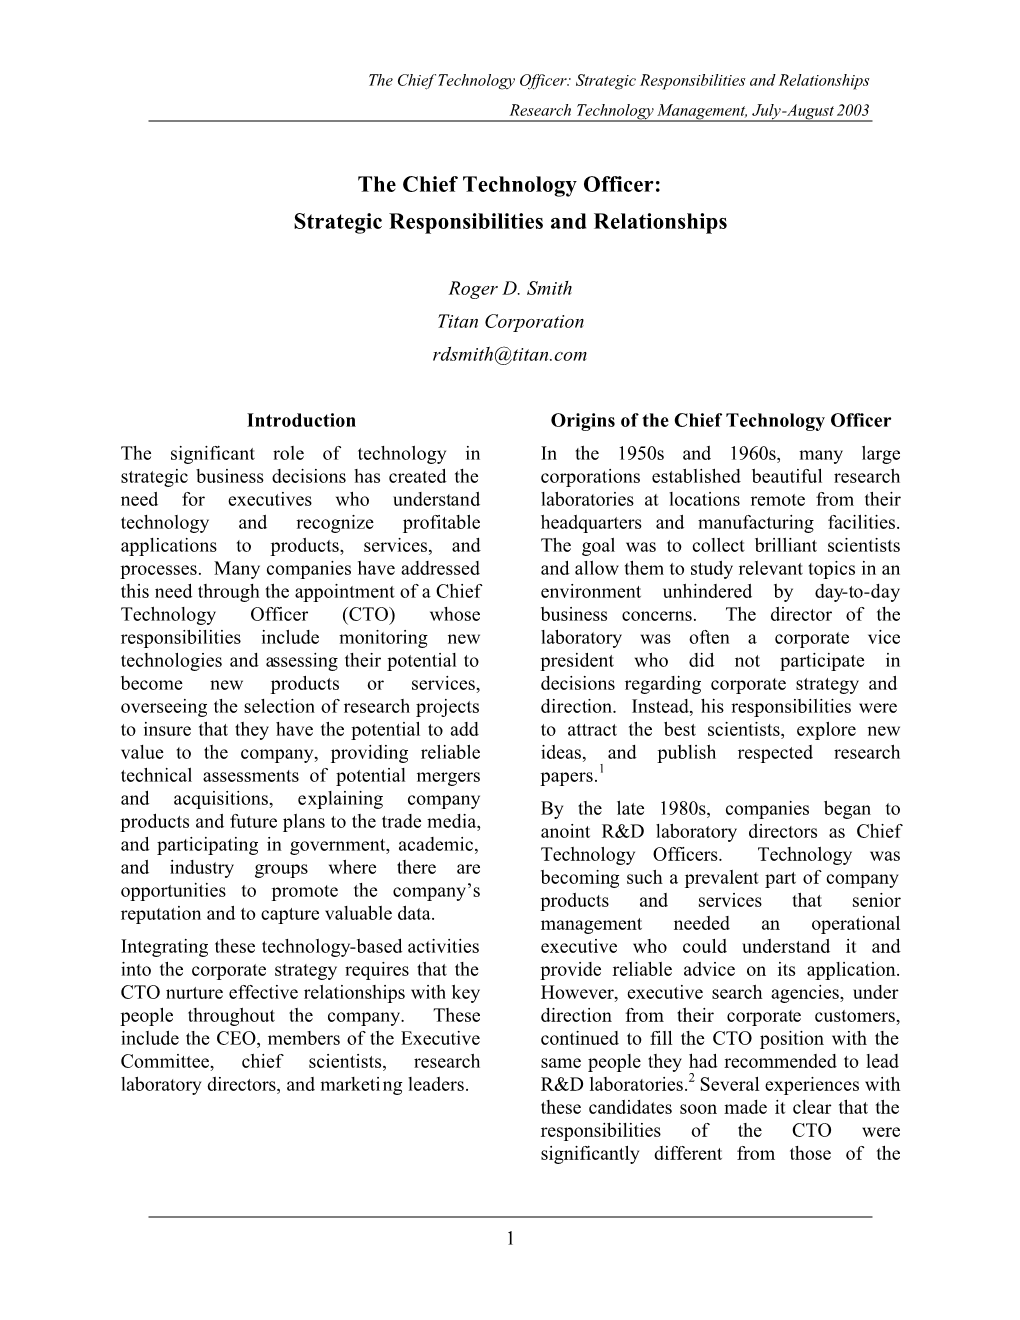 The Chief Technology Officer: Strategic Responsibilities and Relationships Research Technology Management, July-August 2003